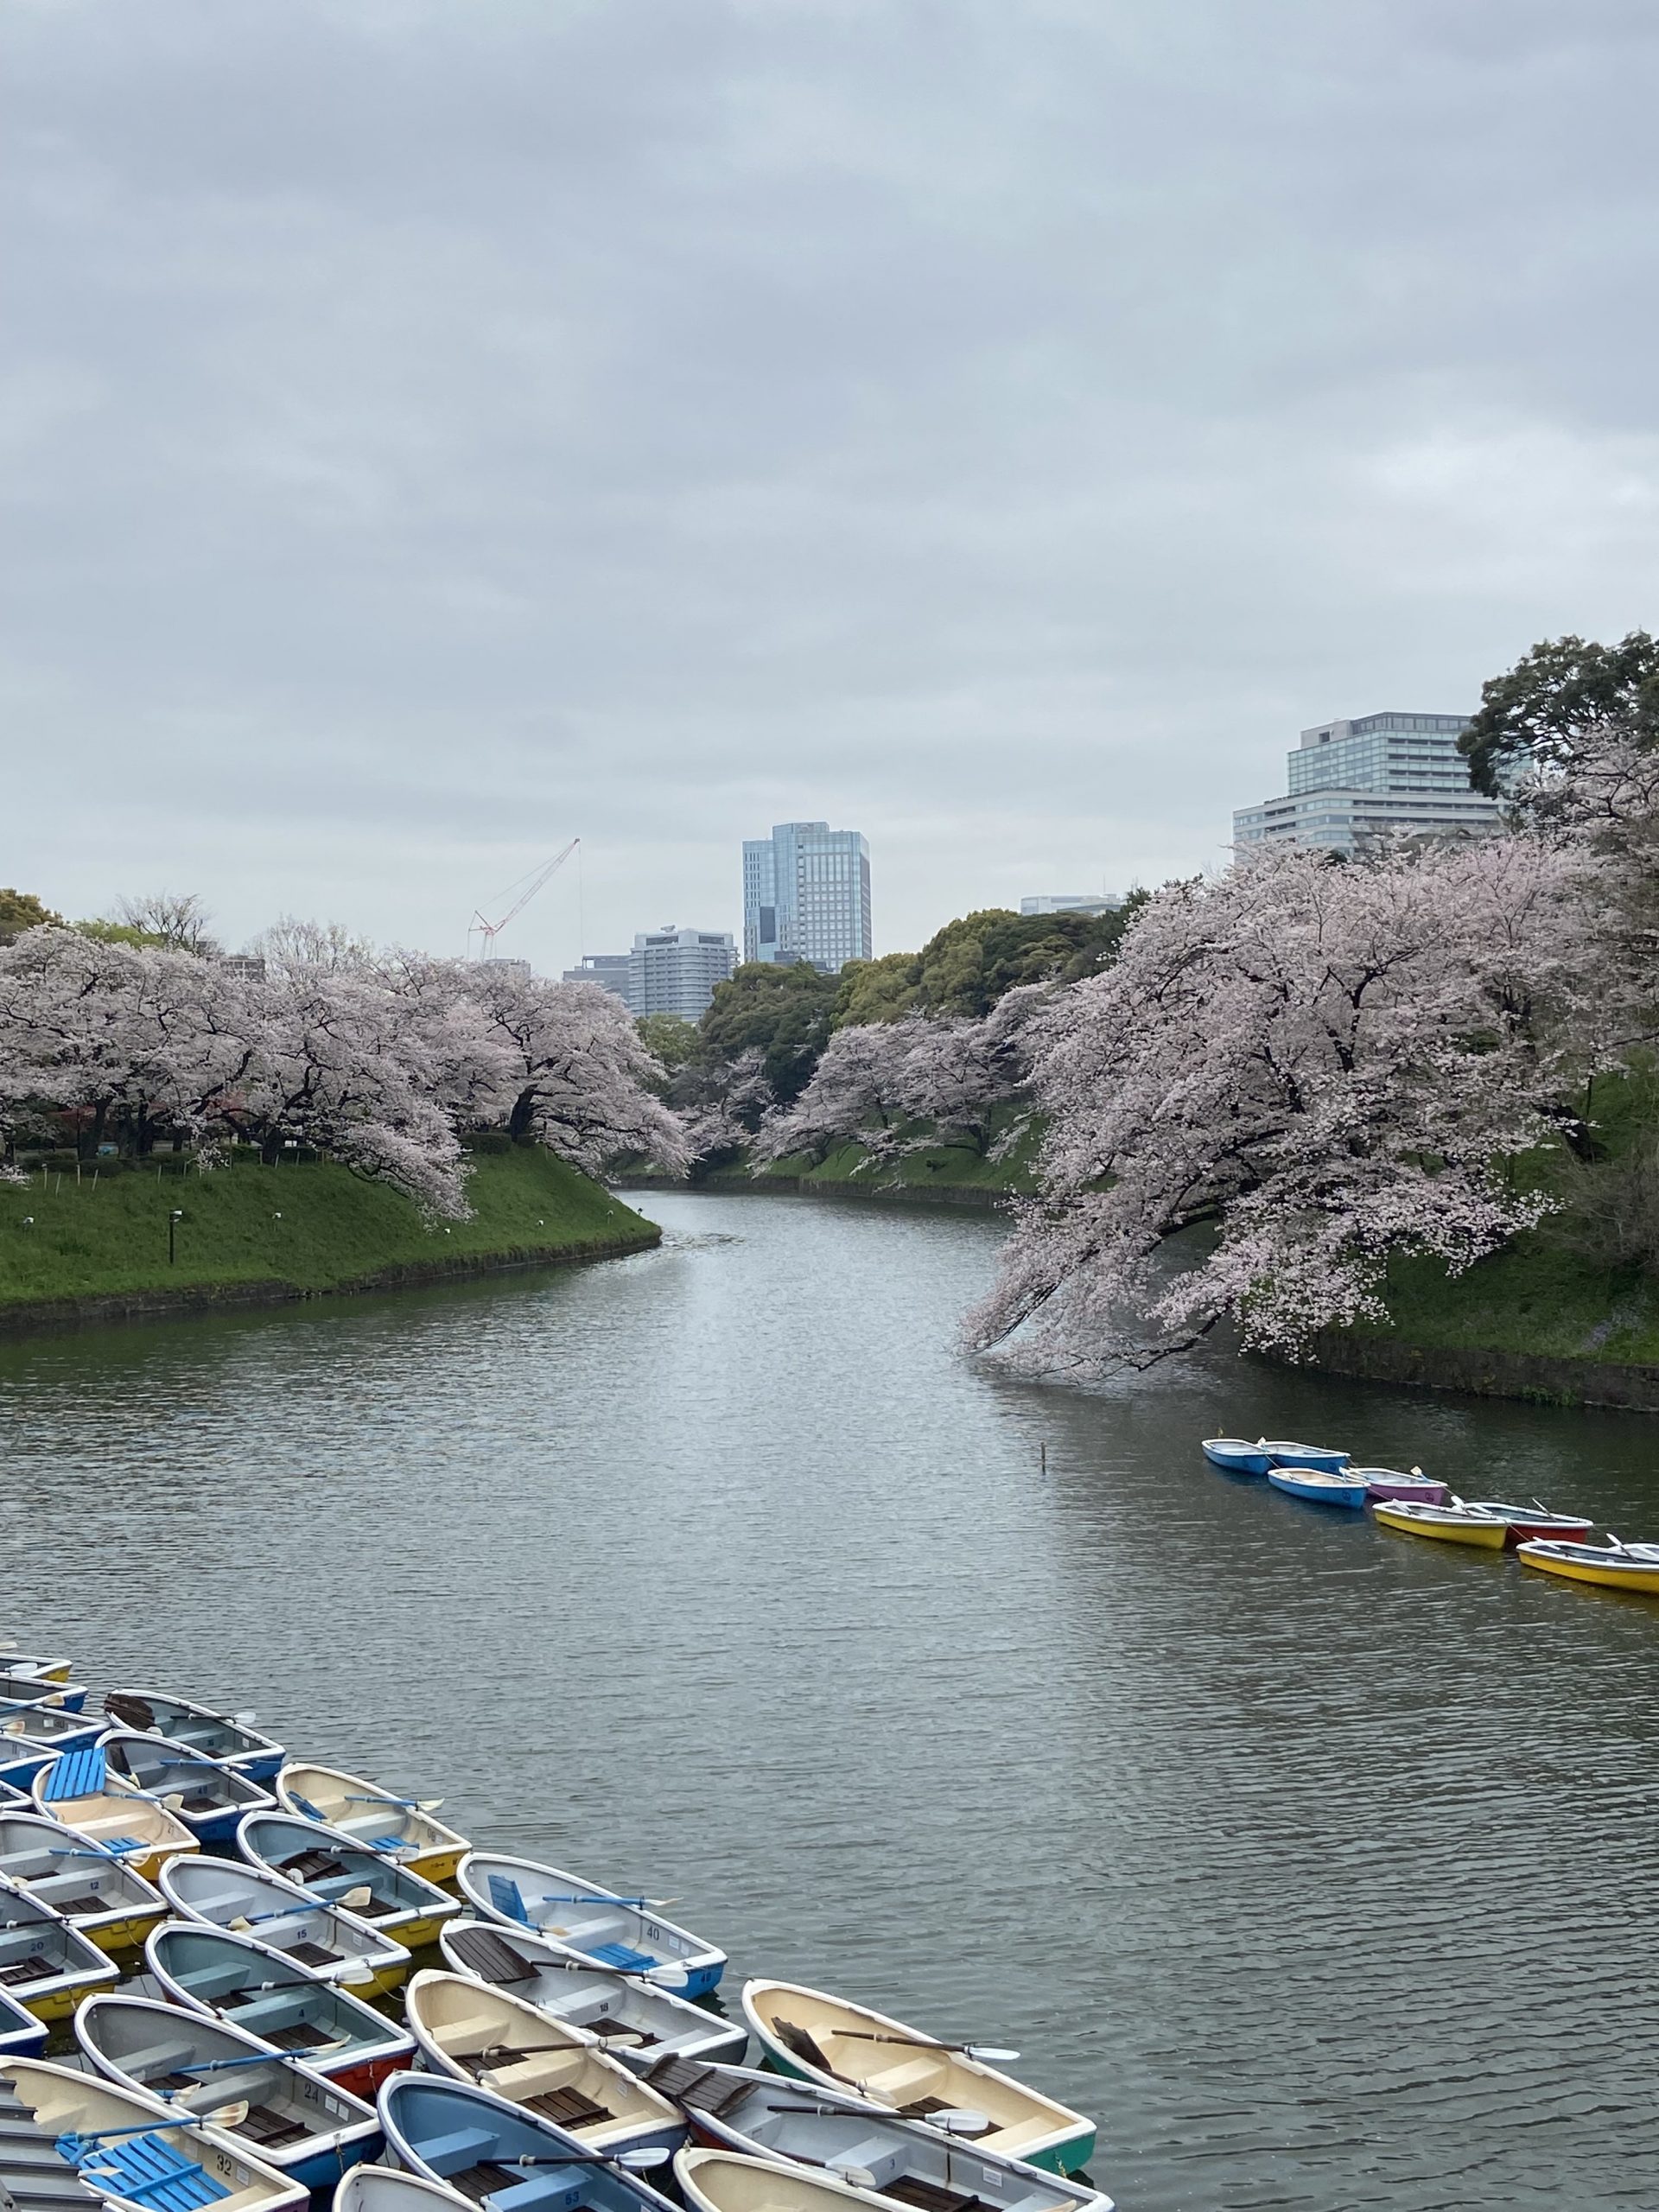 Chidorigafuchi Moat tokyo japan where to see cherry blossoms osaka kyoto best places when is peak bloom